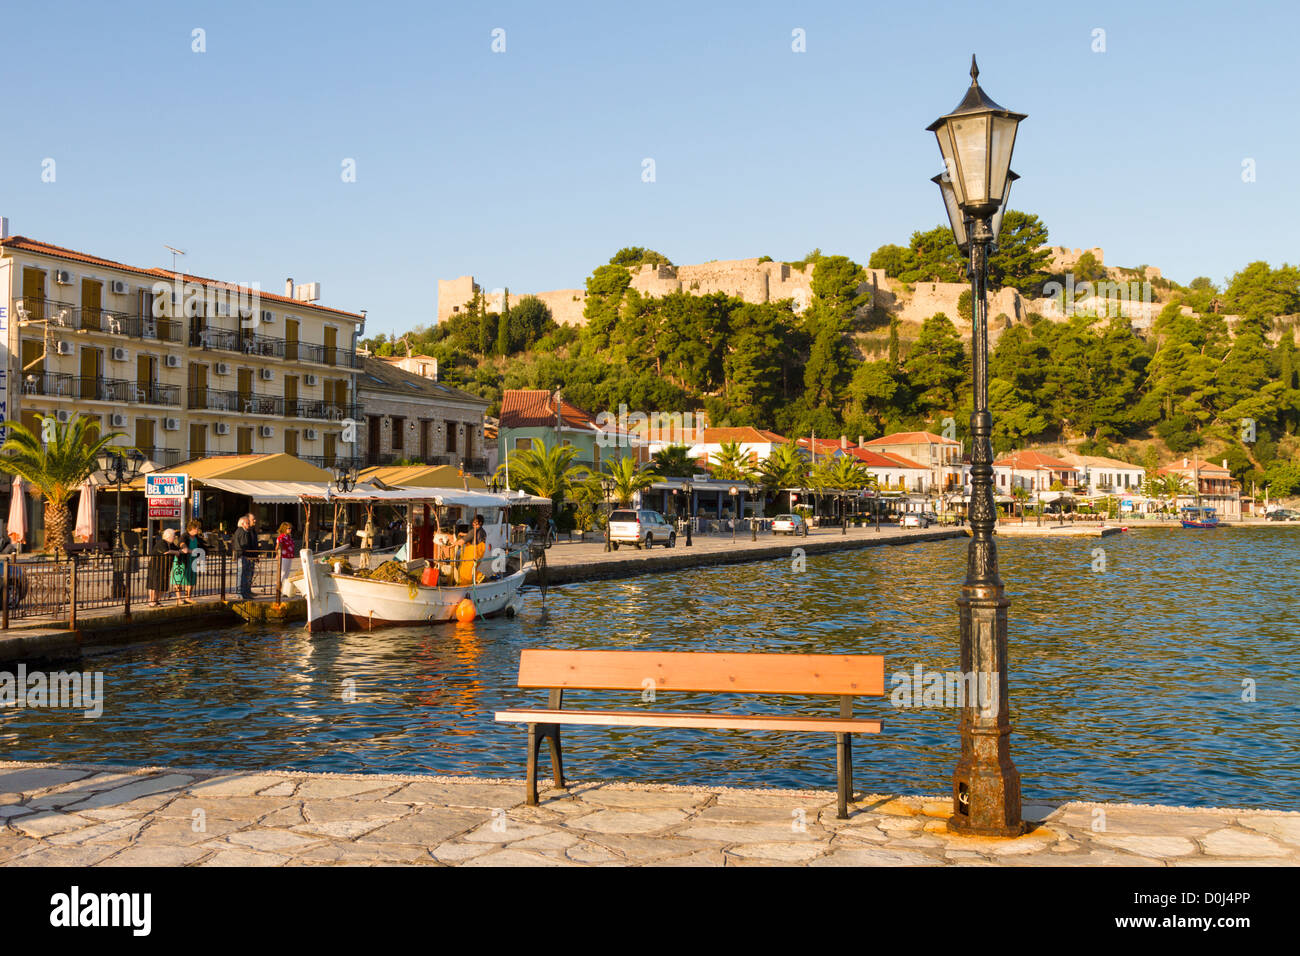 View of the castle and harbour front, Vonitsa, Ambracian Gulf, Greece Stock Photo